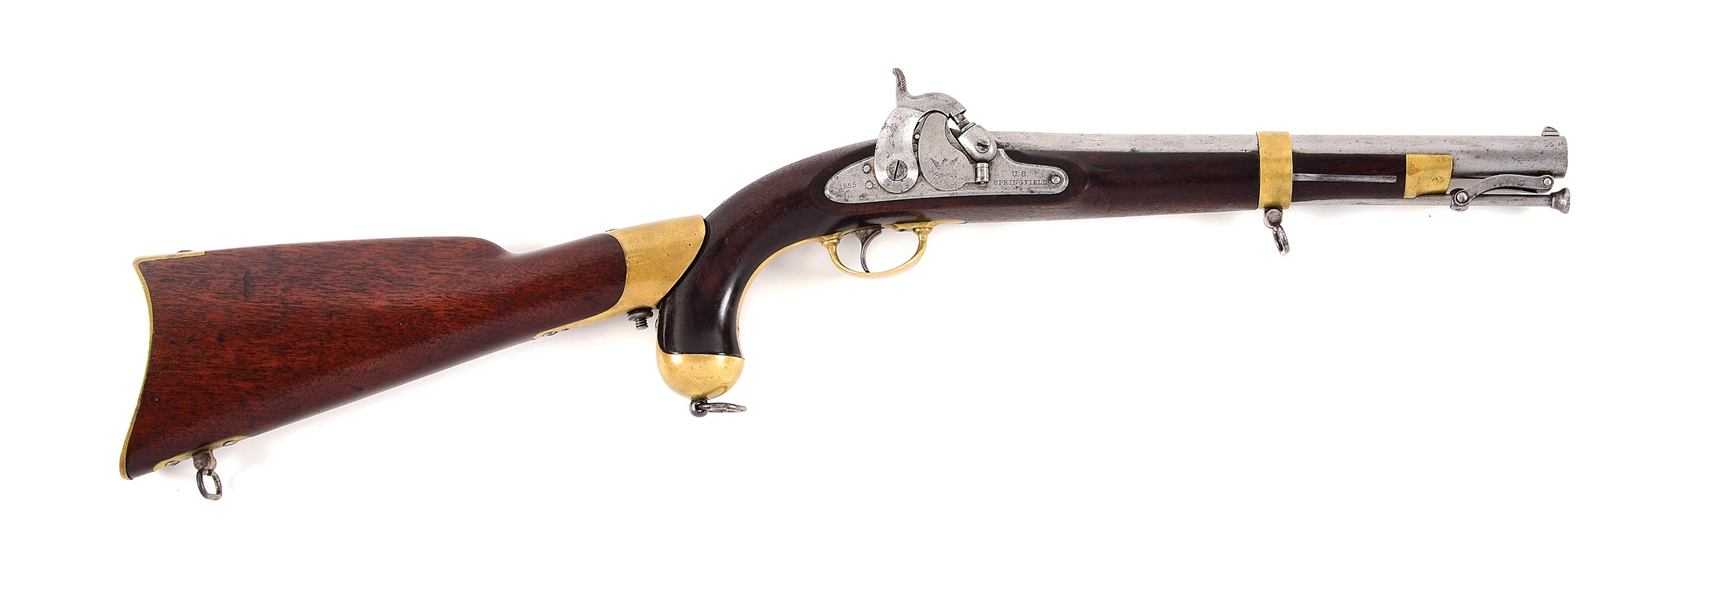 (A) U.S. SPRINGFIELD MODEL 1855 PERCUSSION PISTOL-CARBINE WITH STOCK.